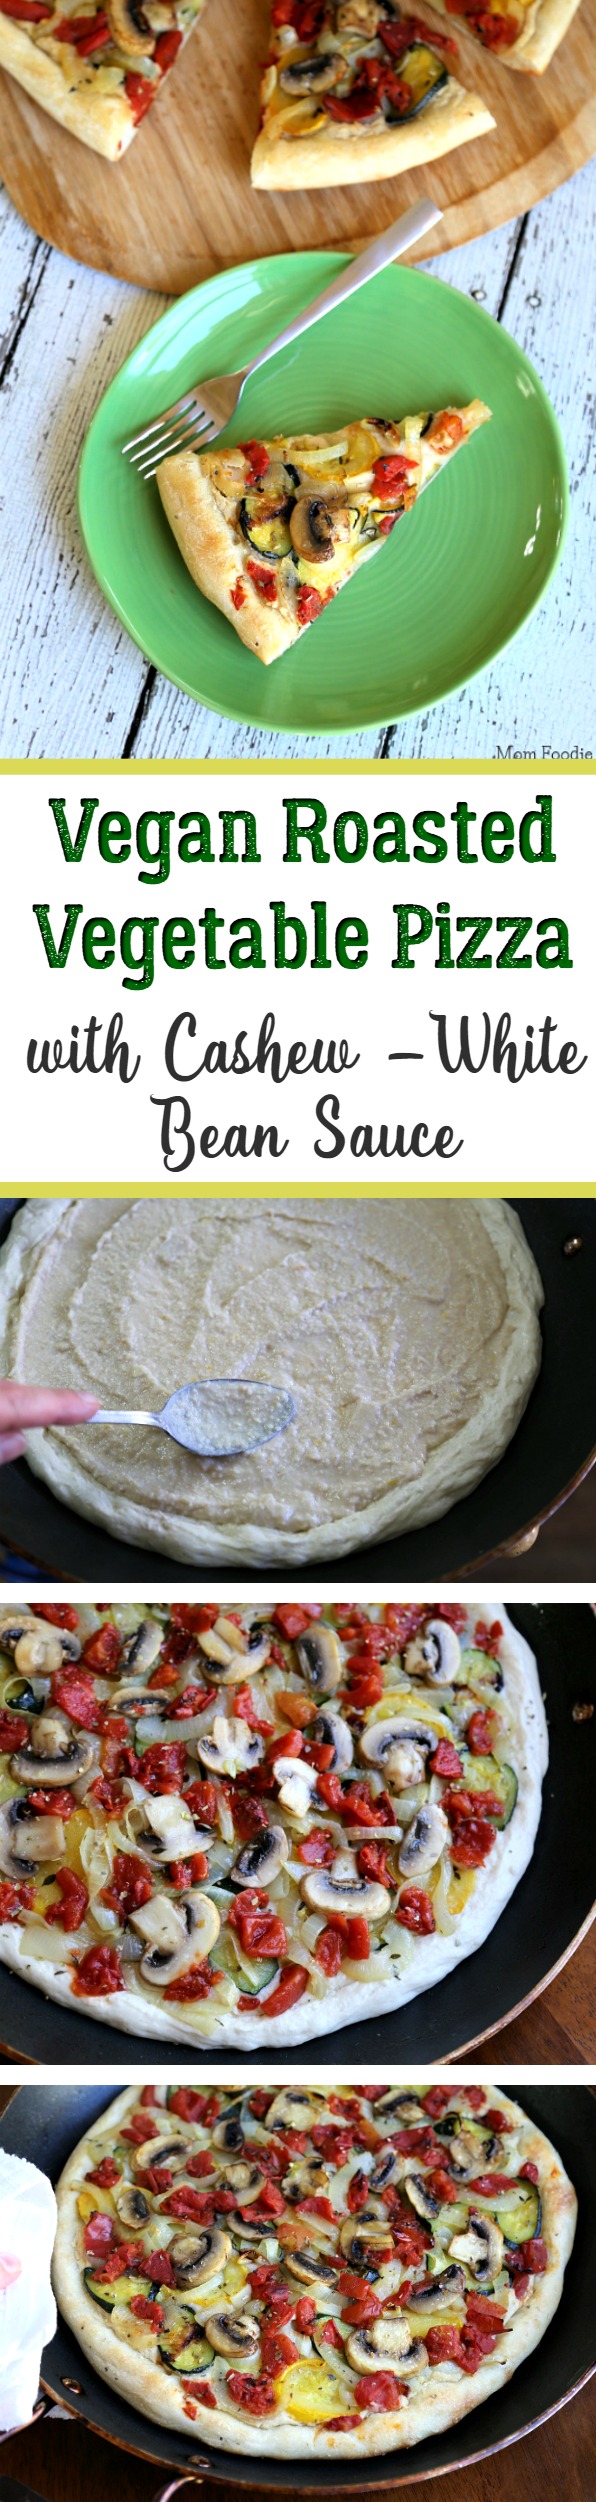 Vegan Roasted Vegetable Pizza with Cashew-White Bean Sauce